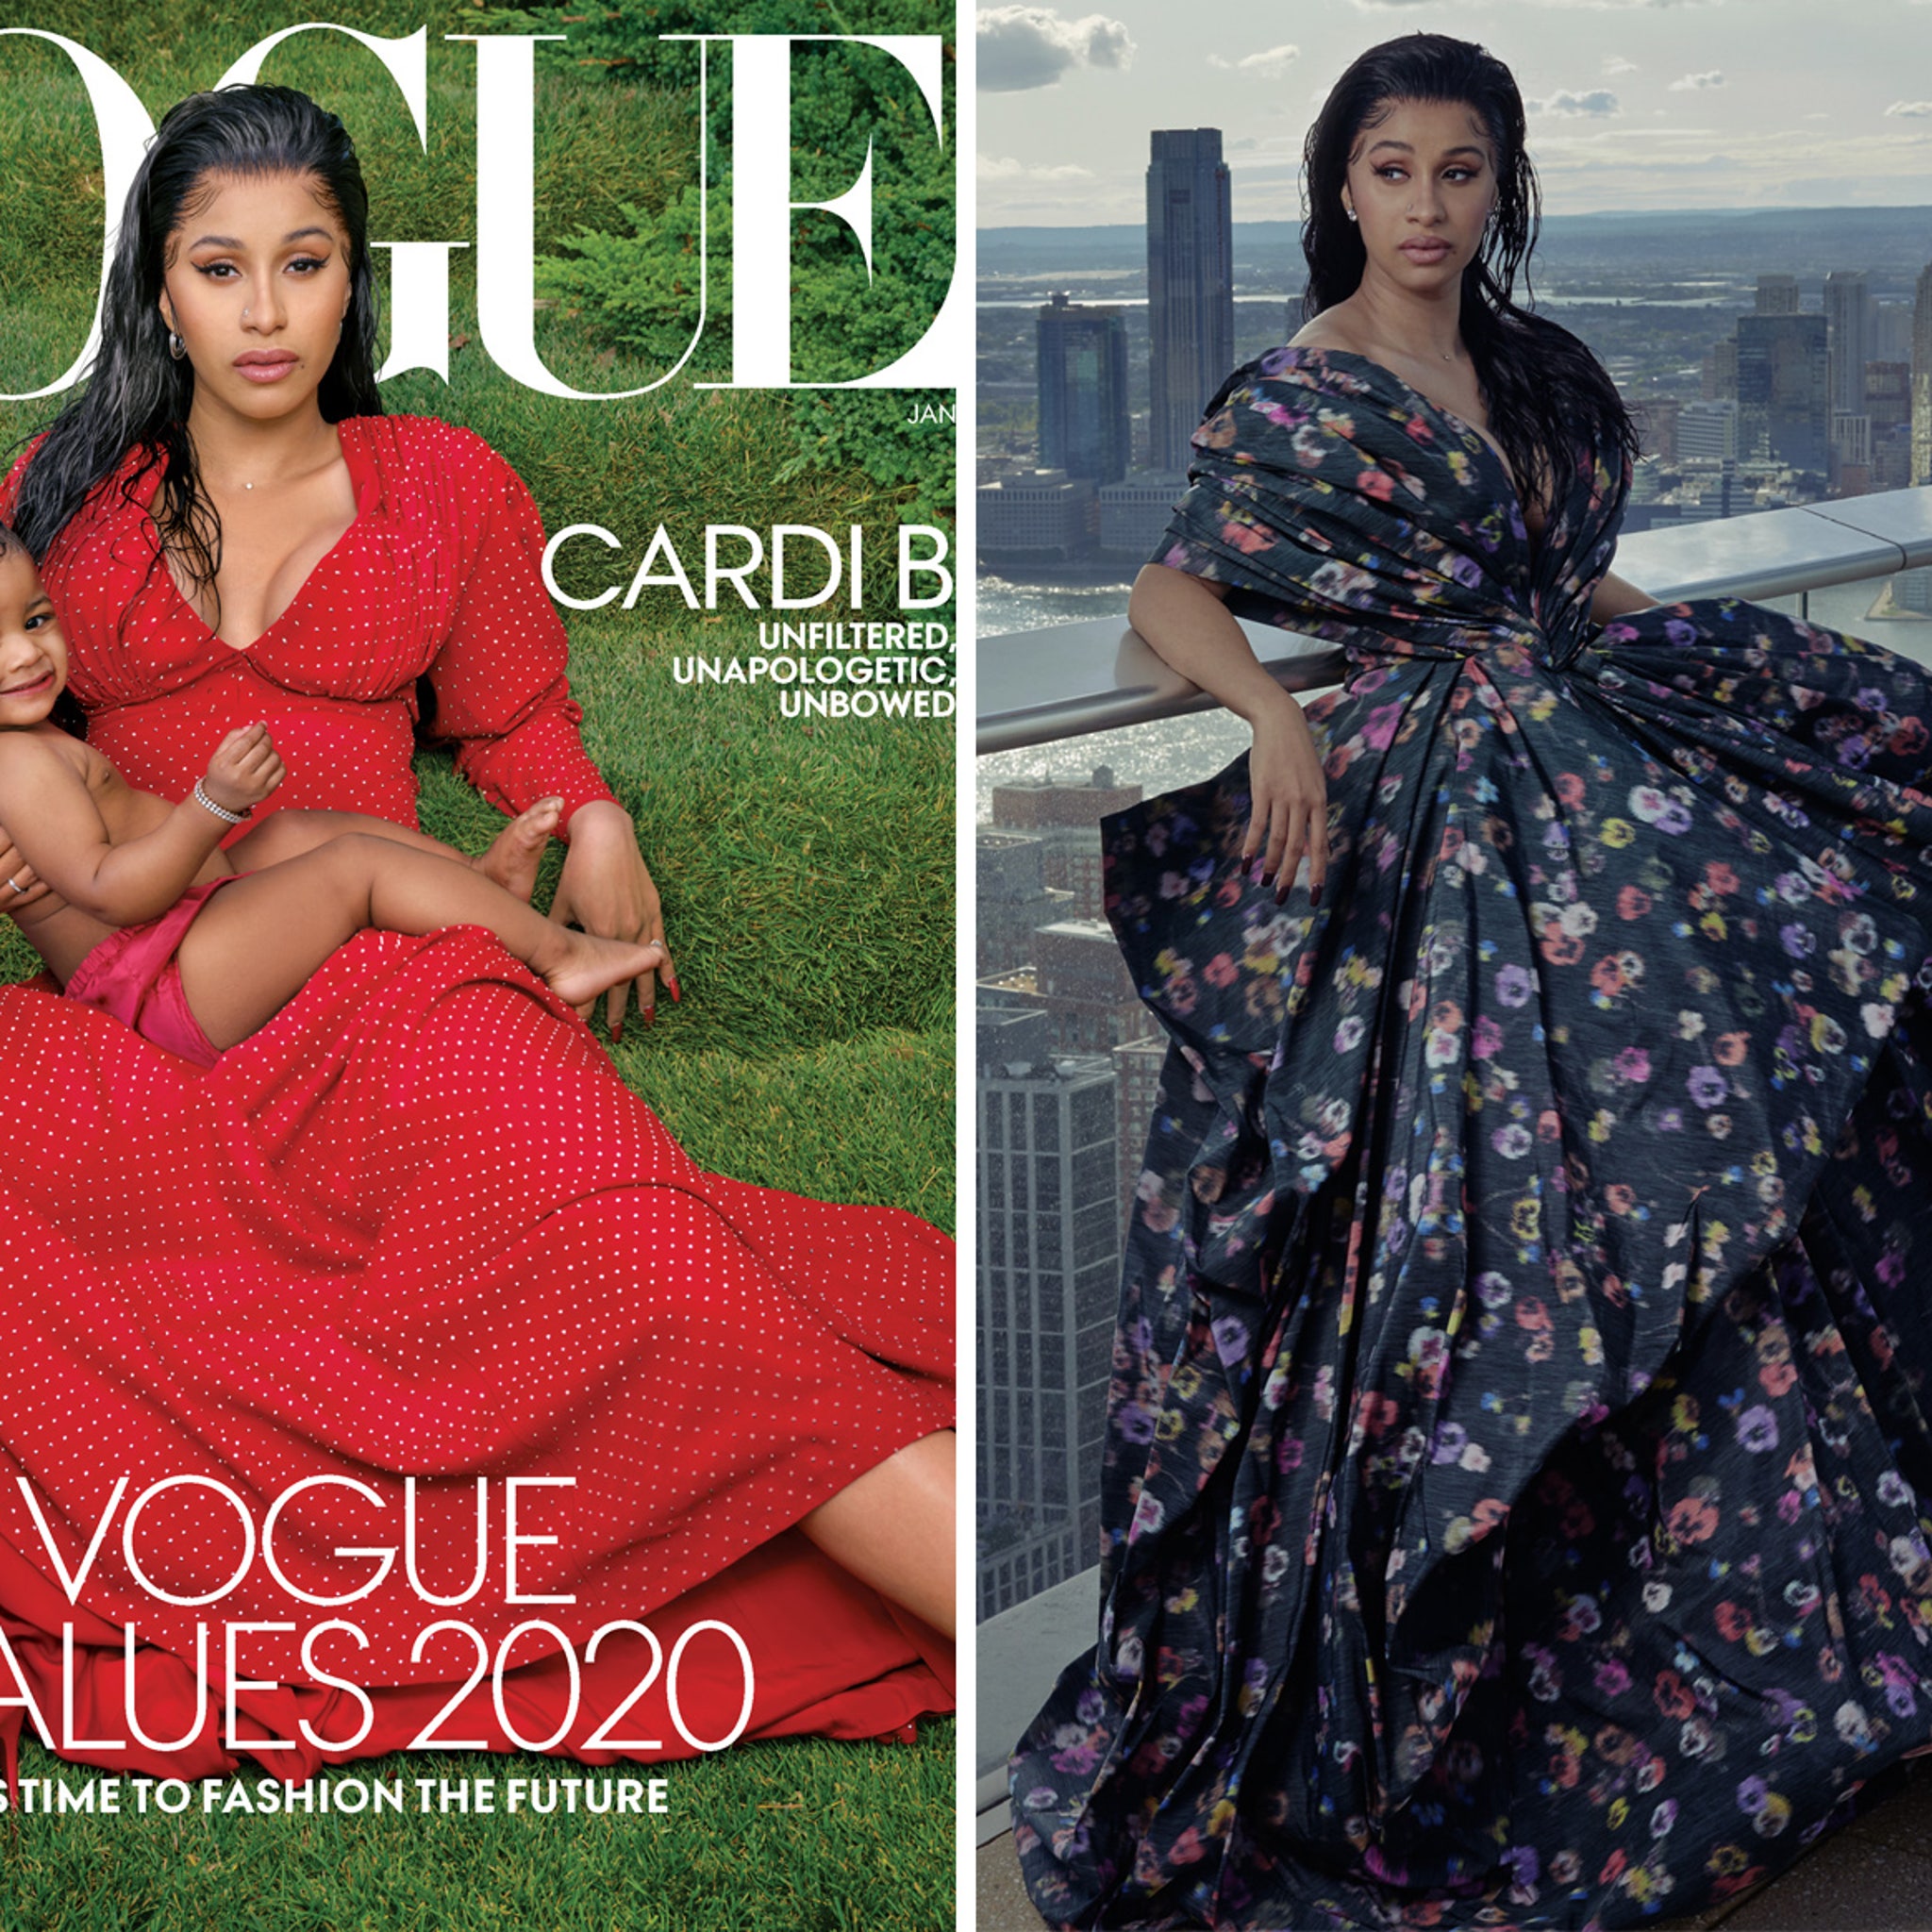 Cardi B Opens Up About Motherhood In Vogue Interview